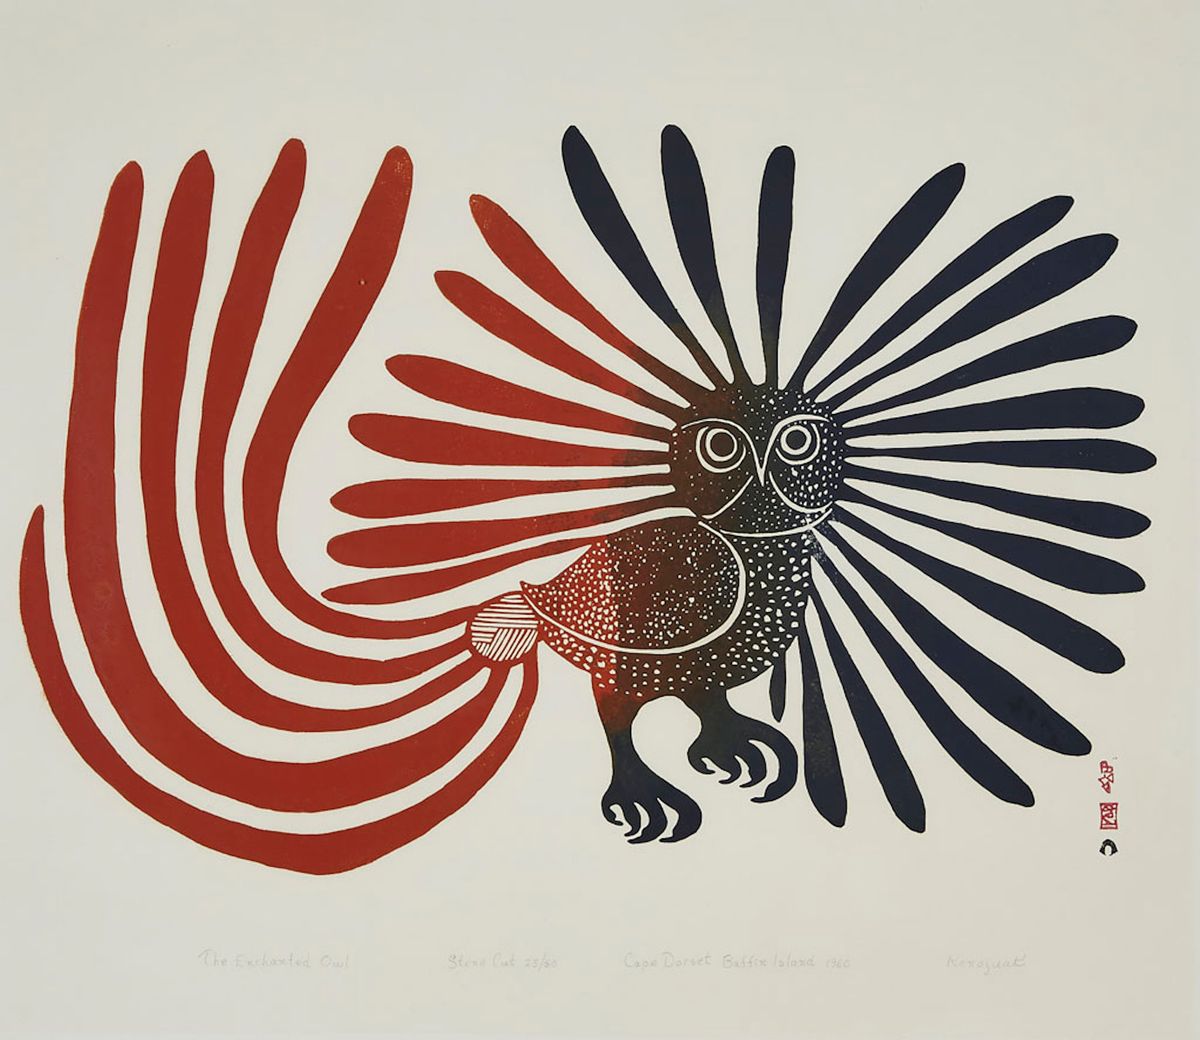 An edition of Kenojuak Ashevak's print The Enchanted Owl (1960), originally sold for C$24, sold for C$216,000 at auction in 2018, but the artist's estate received no cut of the sale. That could change with new legislation under consideration Courtesy Waddington's